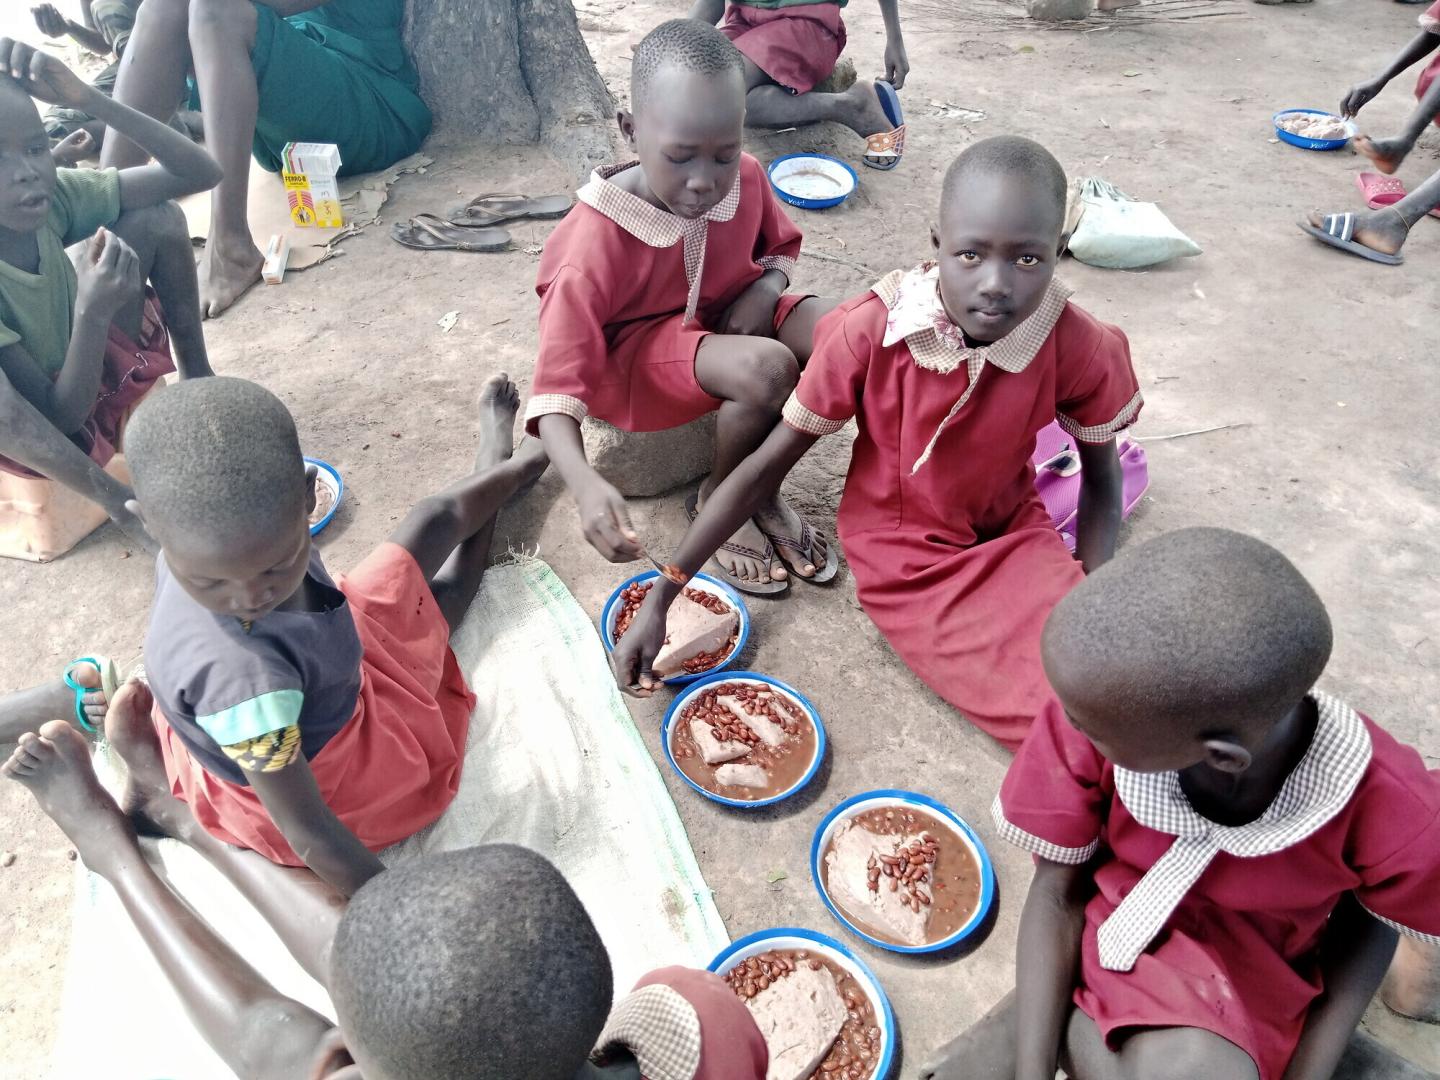 Five South Sudanese students in red uniforms sit on the ground and eat from plates